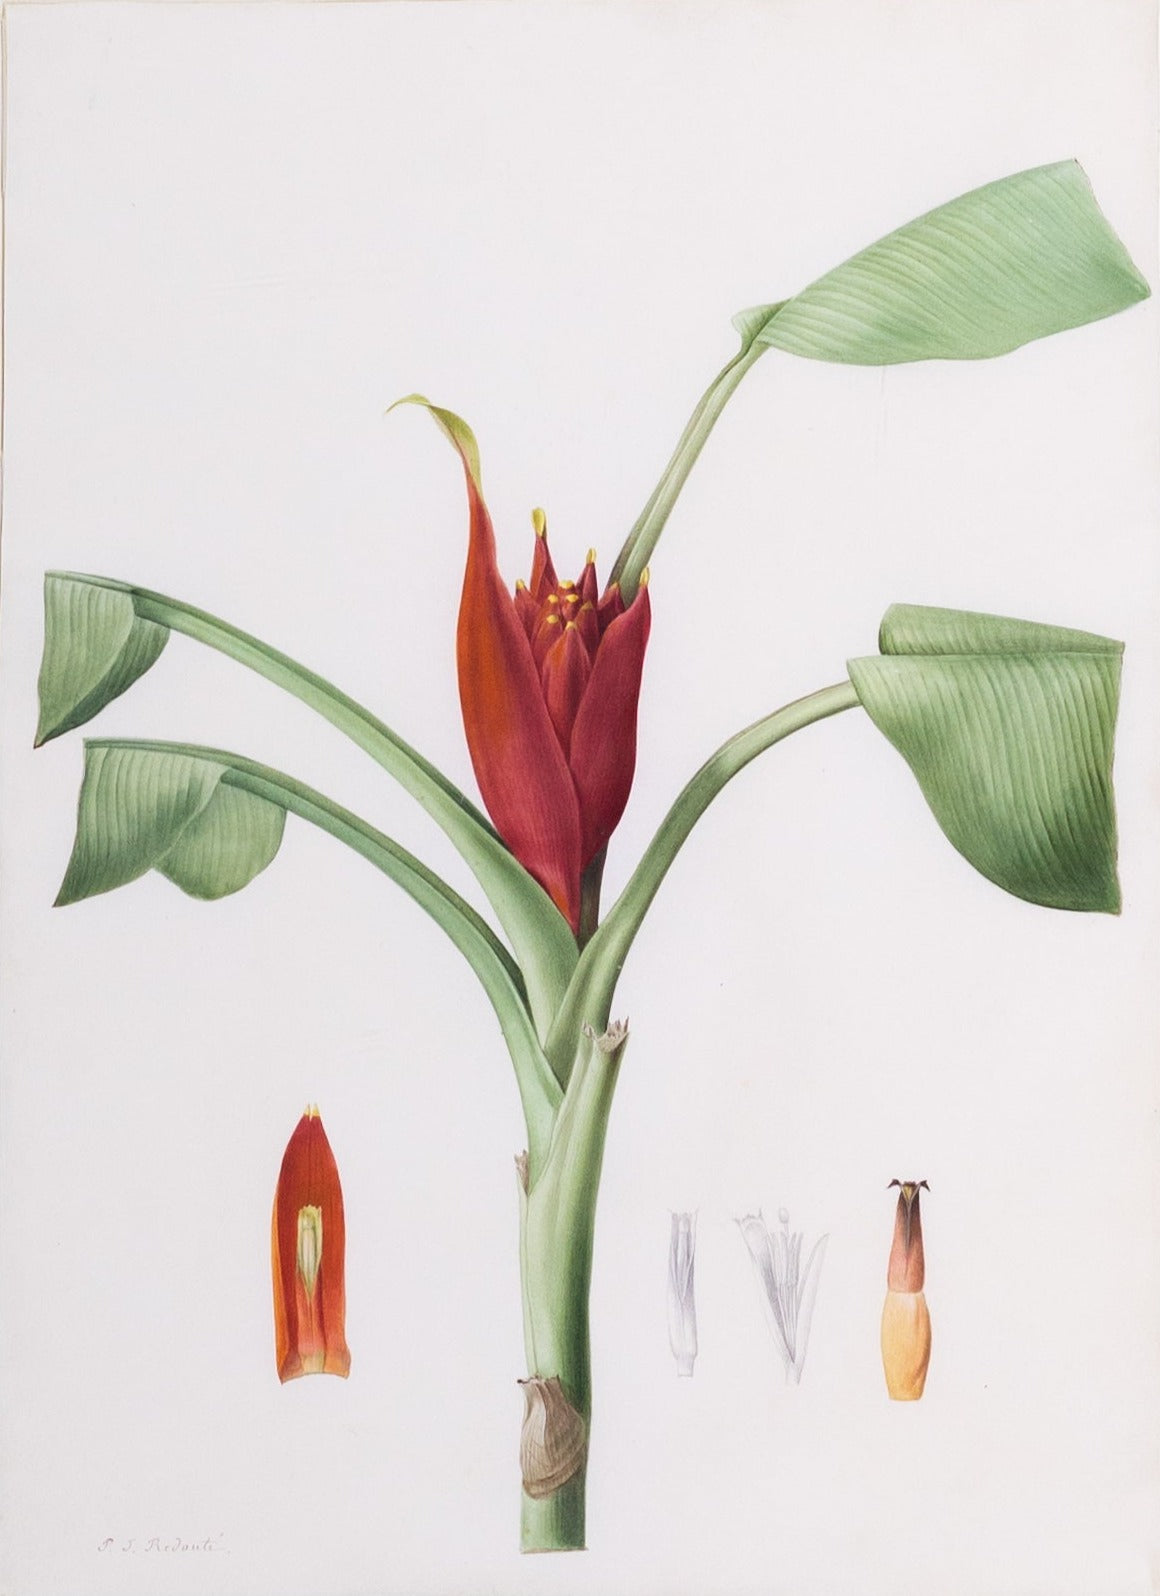 Redouté, Pierre-Joseph. "Wild or Red-flowered Banana". Prepared for Les Liliacées, ca. 1802-1816.